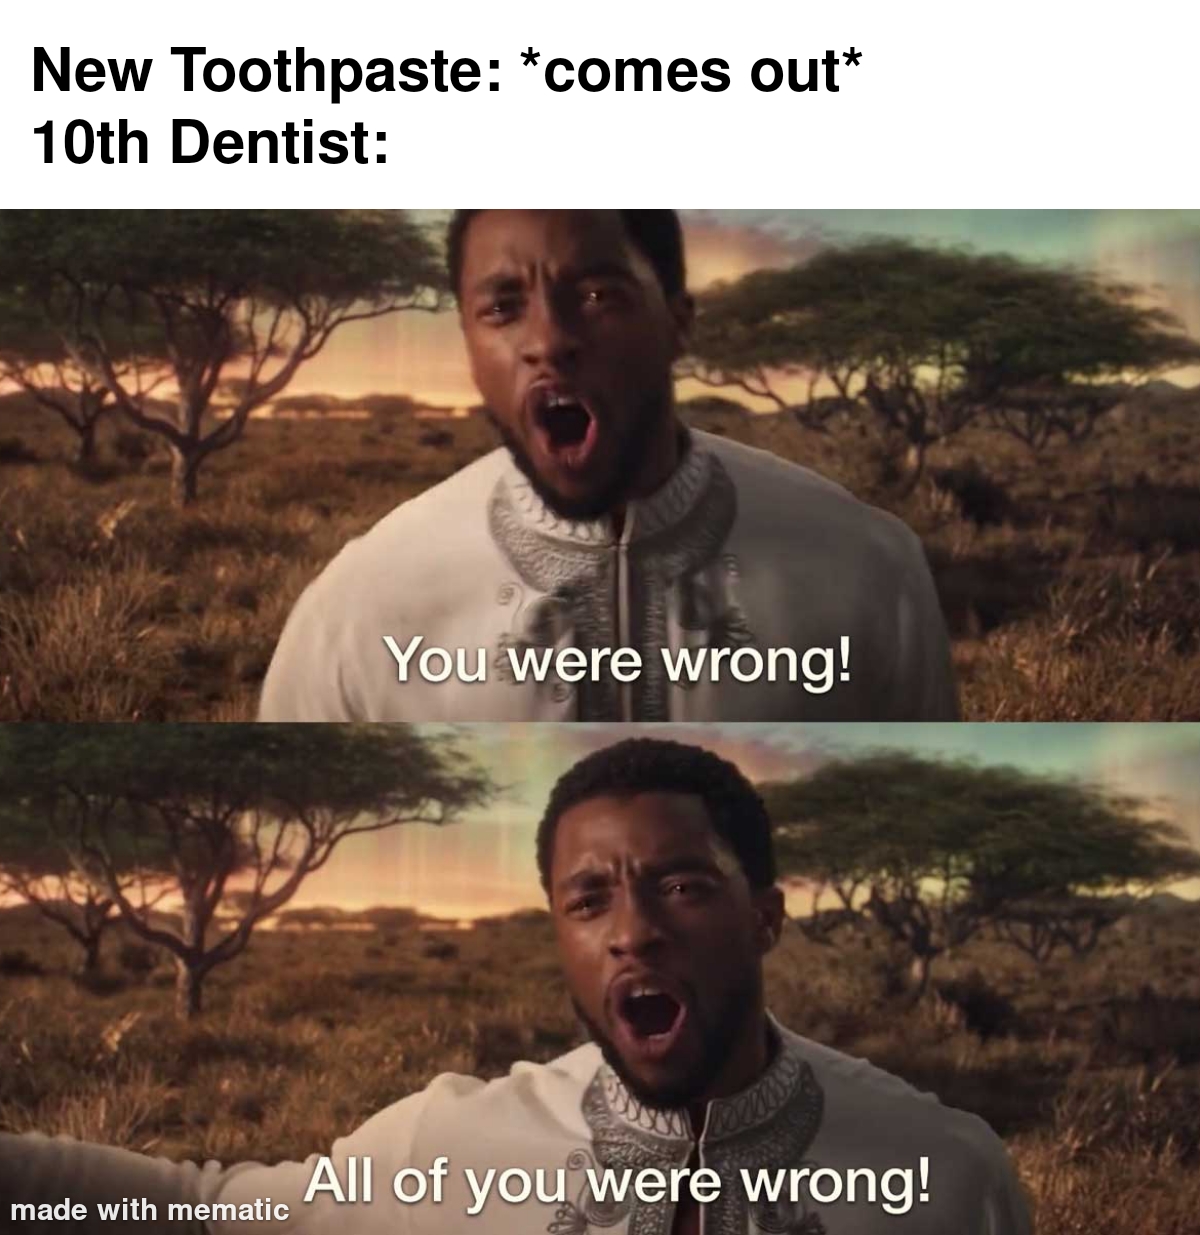 black panther all of you were wrong - New Toothpaste comes out 10th Dentist You were wrong! All of you were wrong! made with mematic